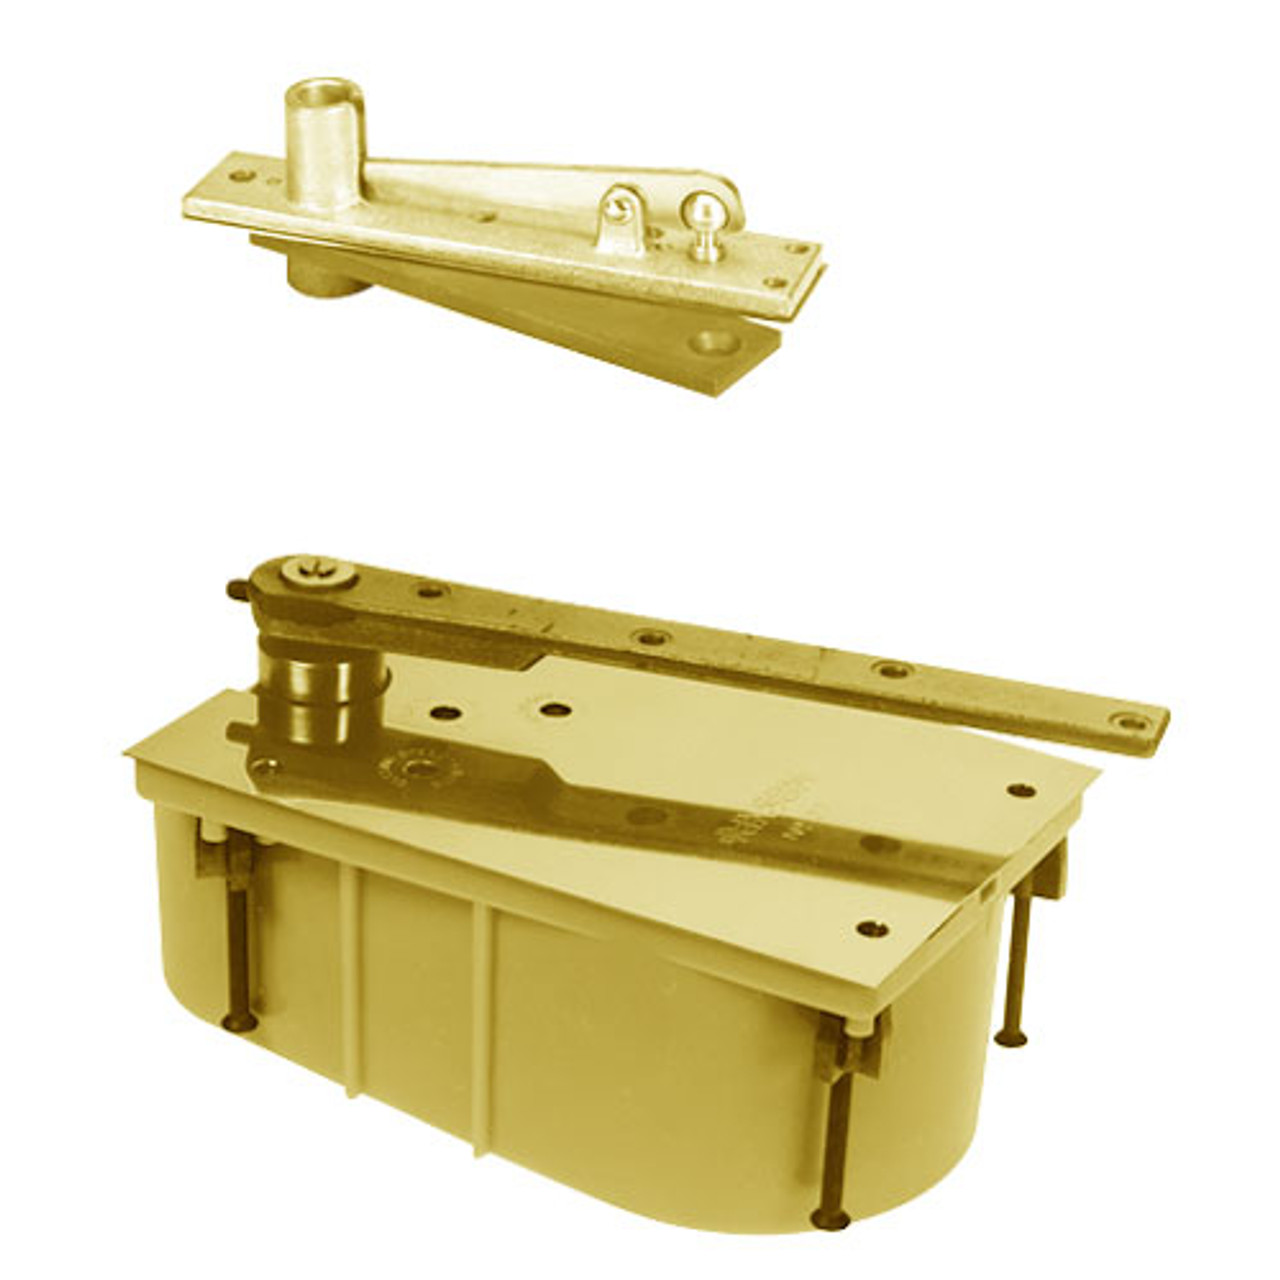 28-105N-554-CWF-LH-605 Rixson 28 Series Heavy Duty Single Acting Center Hung Floor Closer with Concealed Arm in Bright Brass Finish